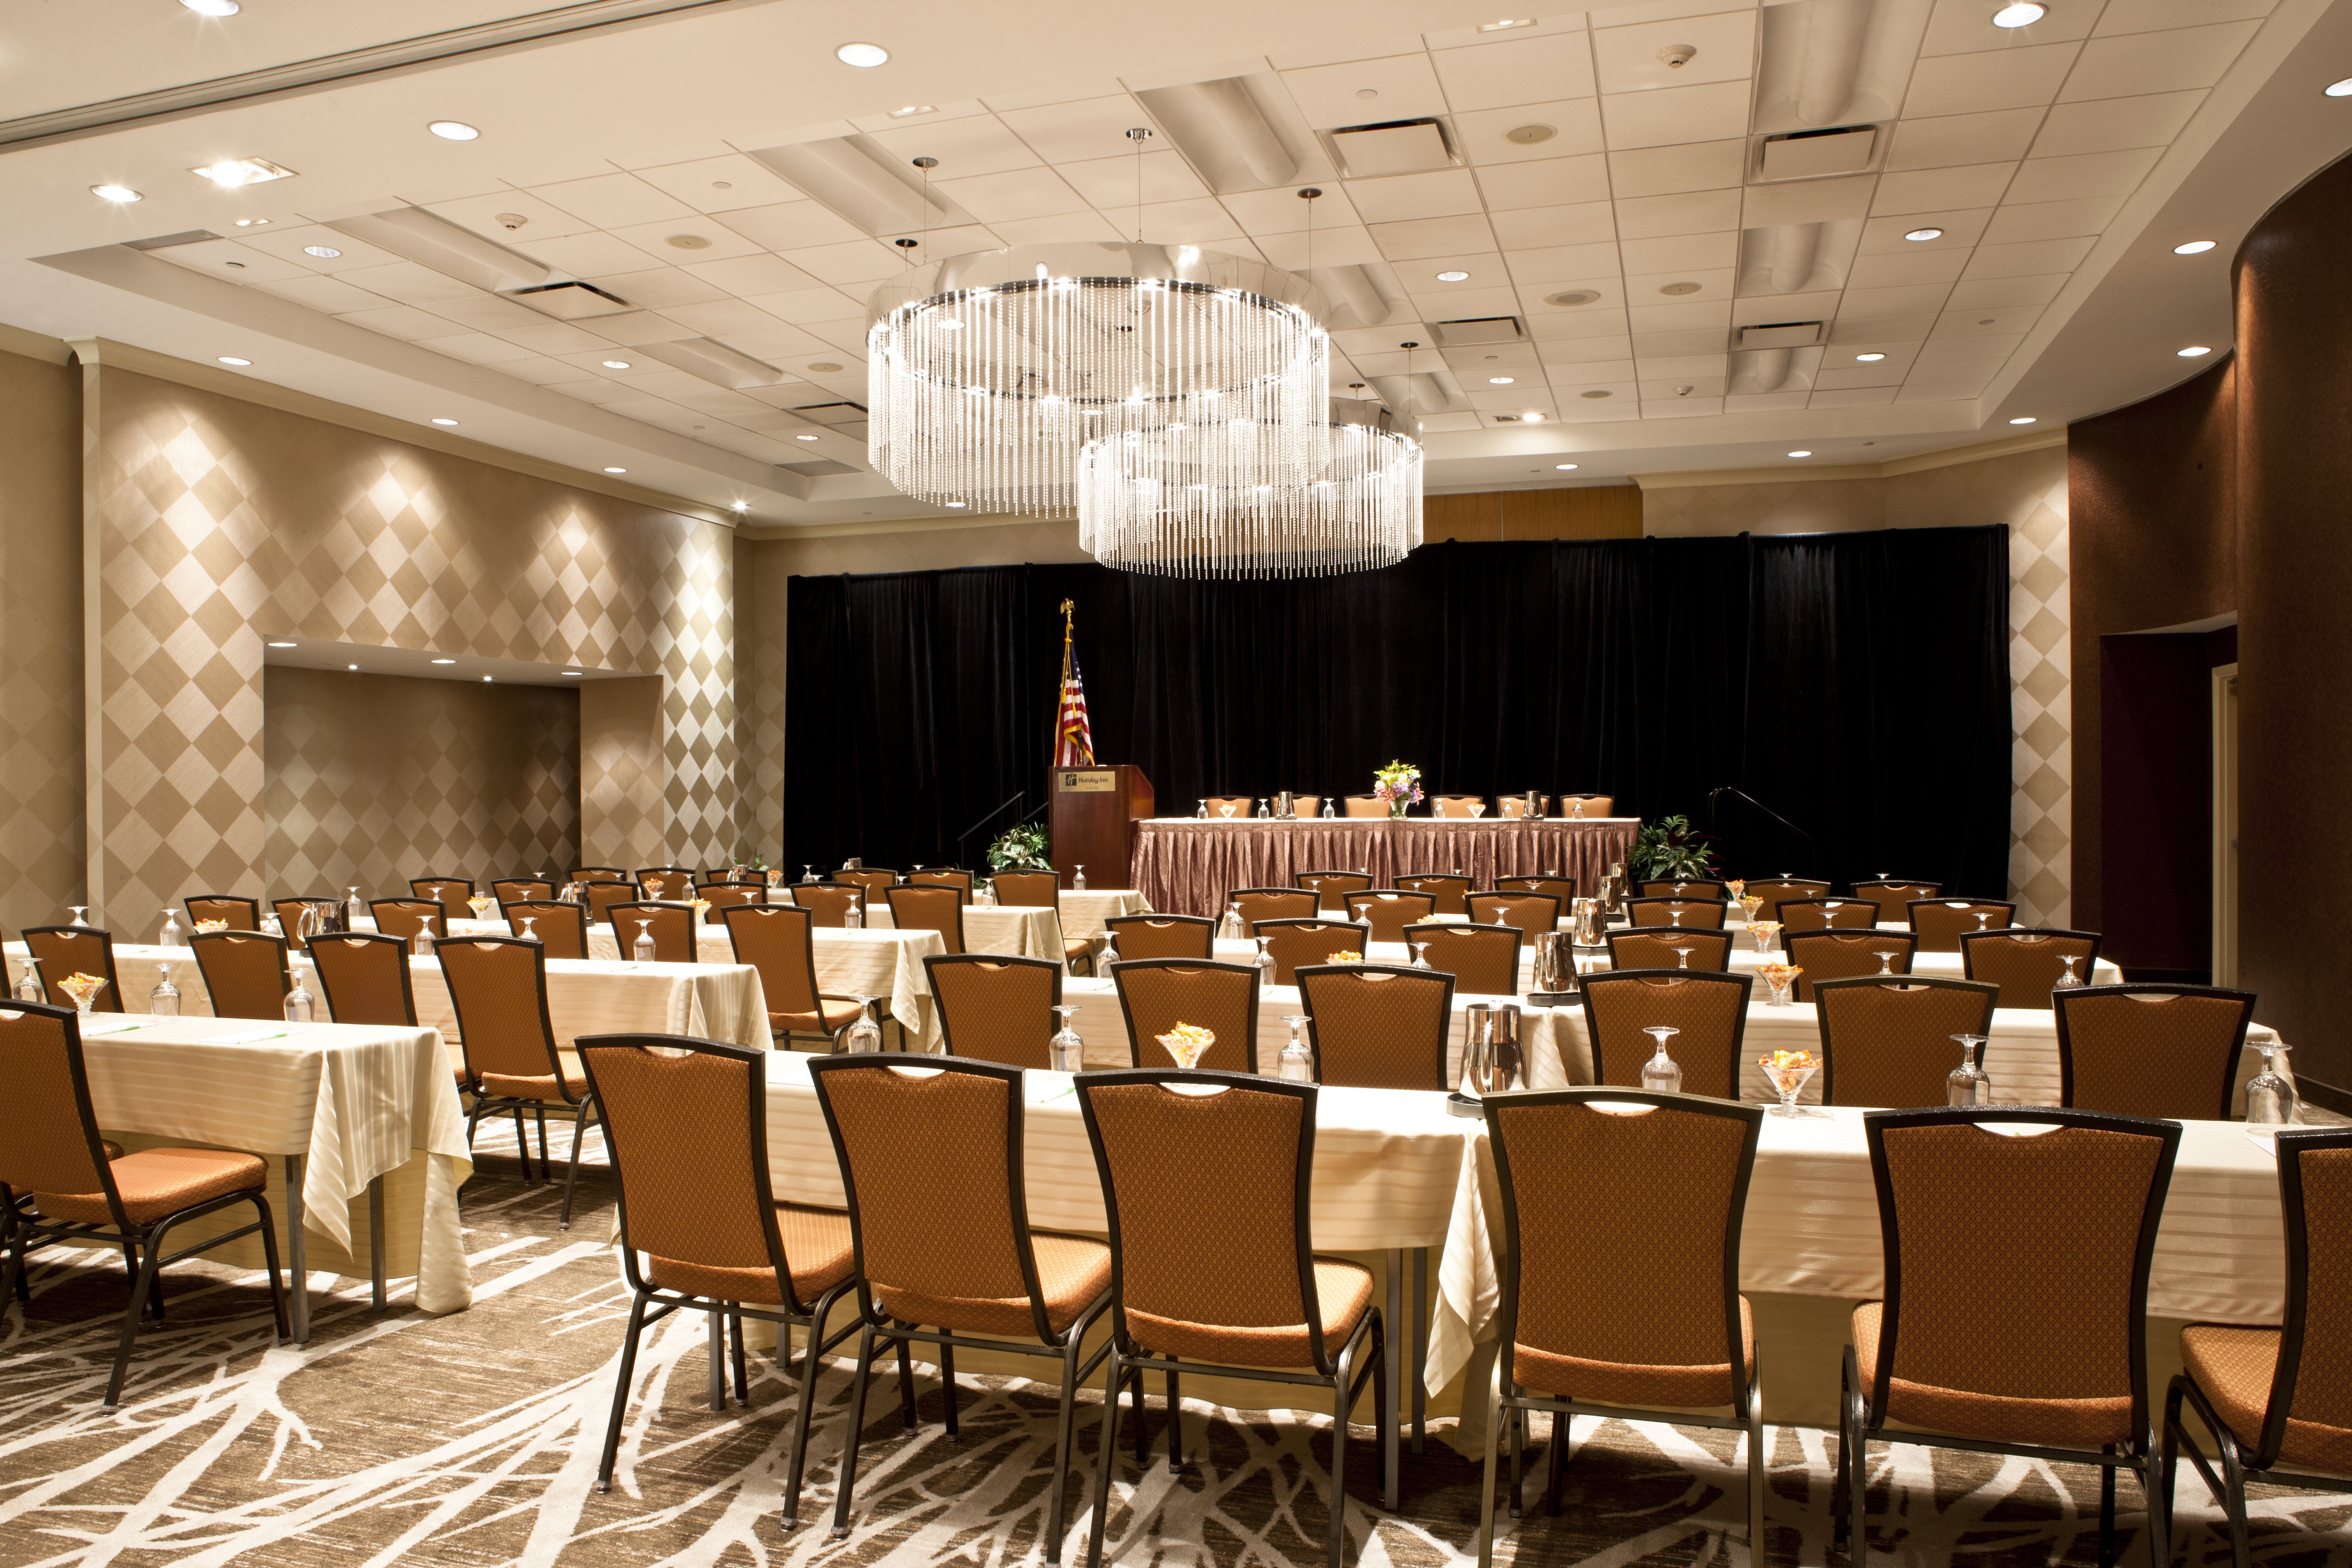 8,000 square feet of meeting space available!